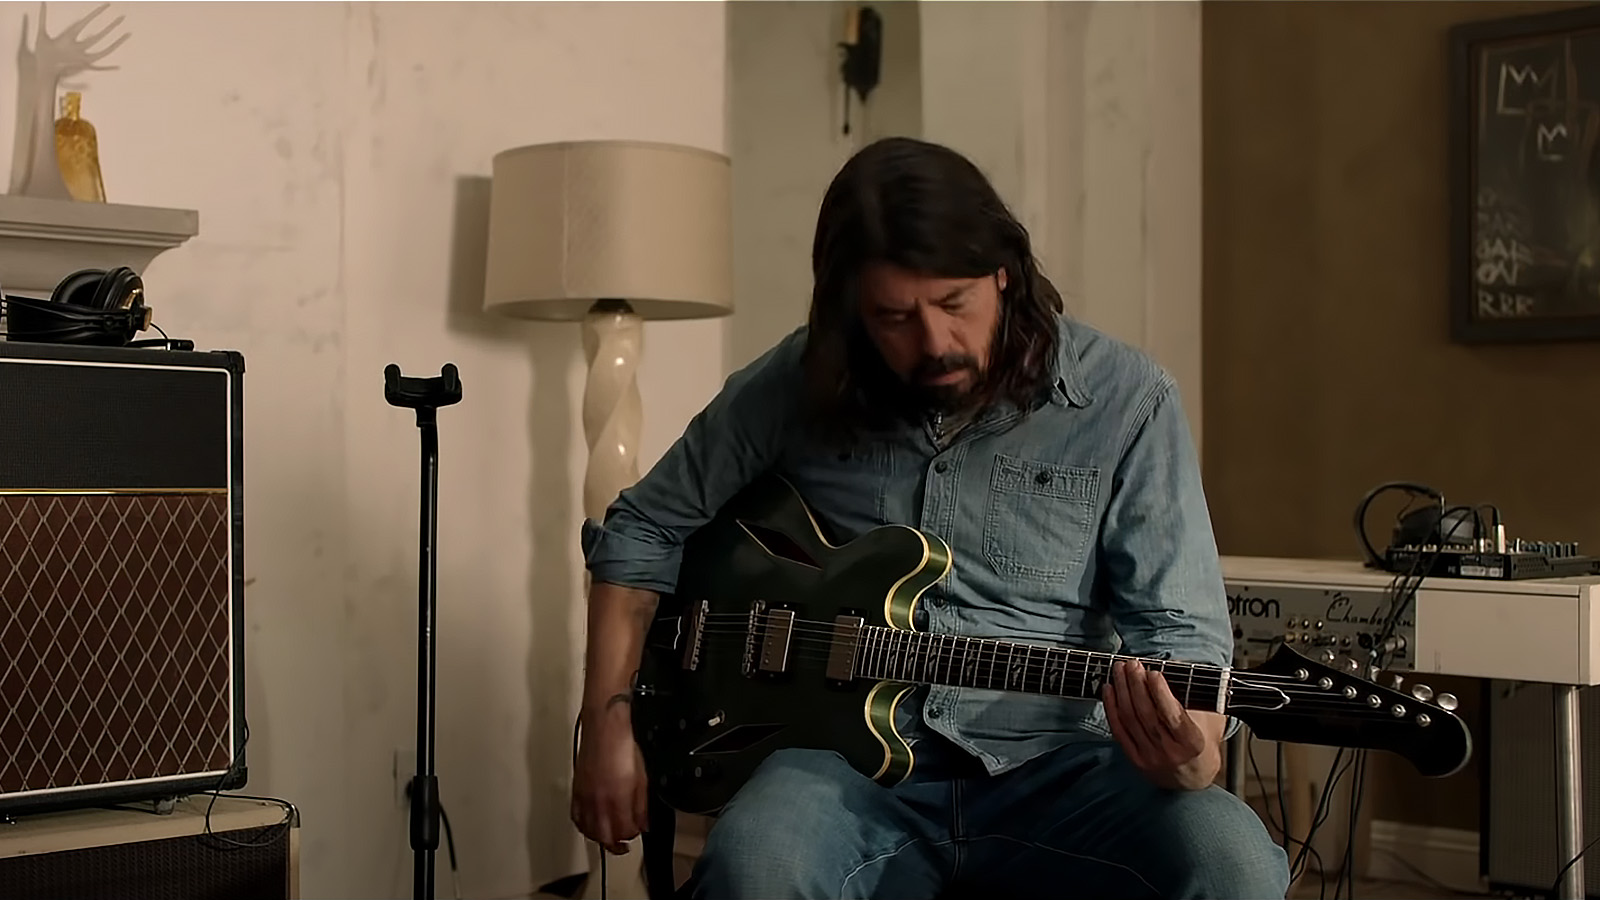 In Studio 666 a dispirited Dave Grohl is struggling to find inspiration for album 10.